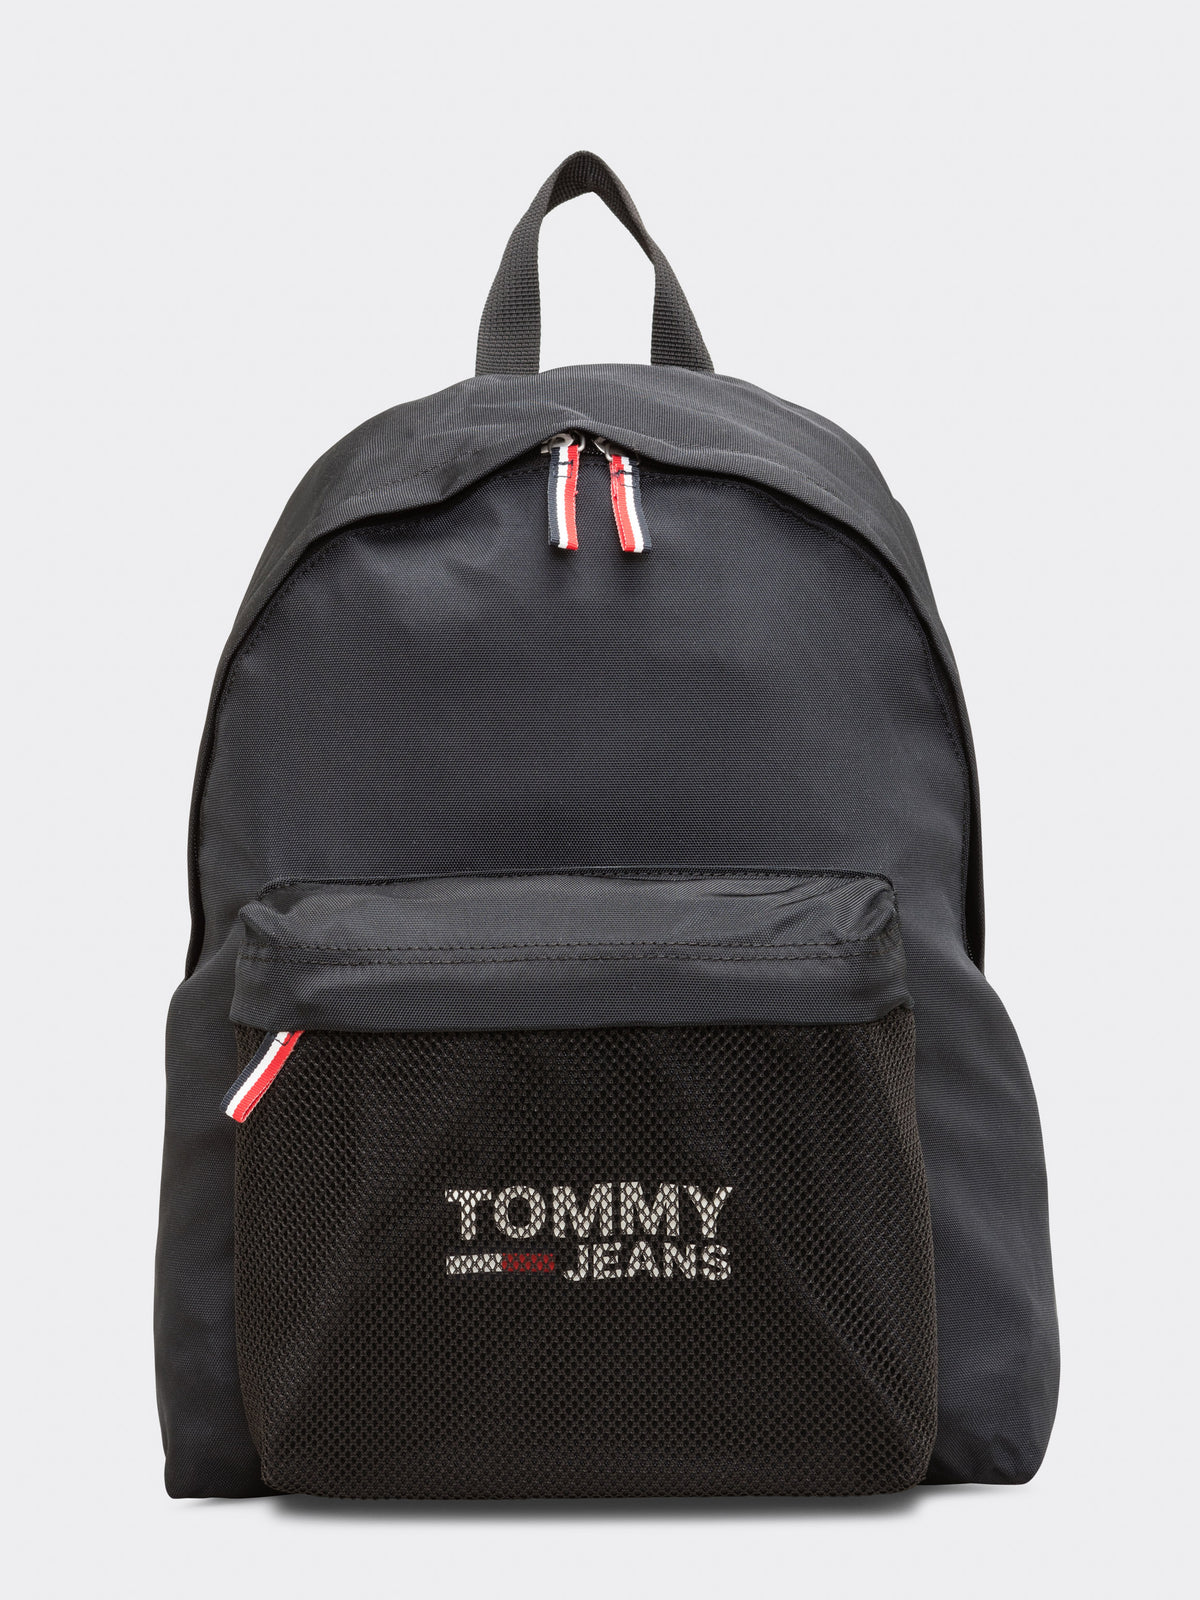 Cool City Backpack in Black